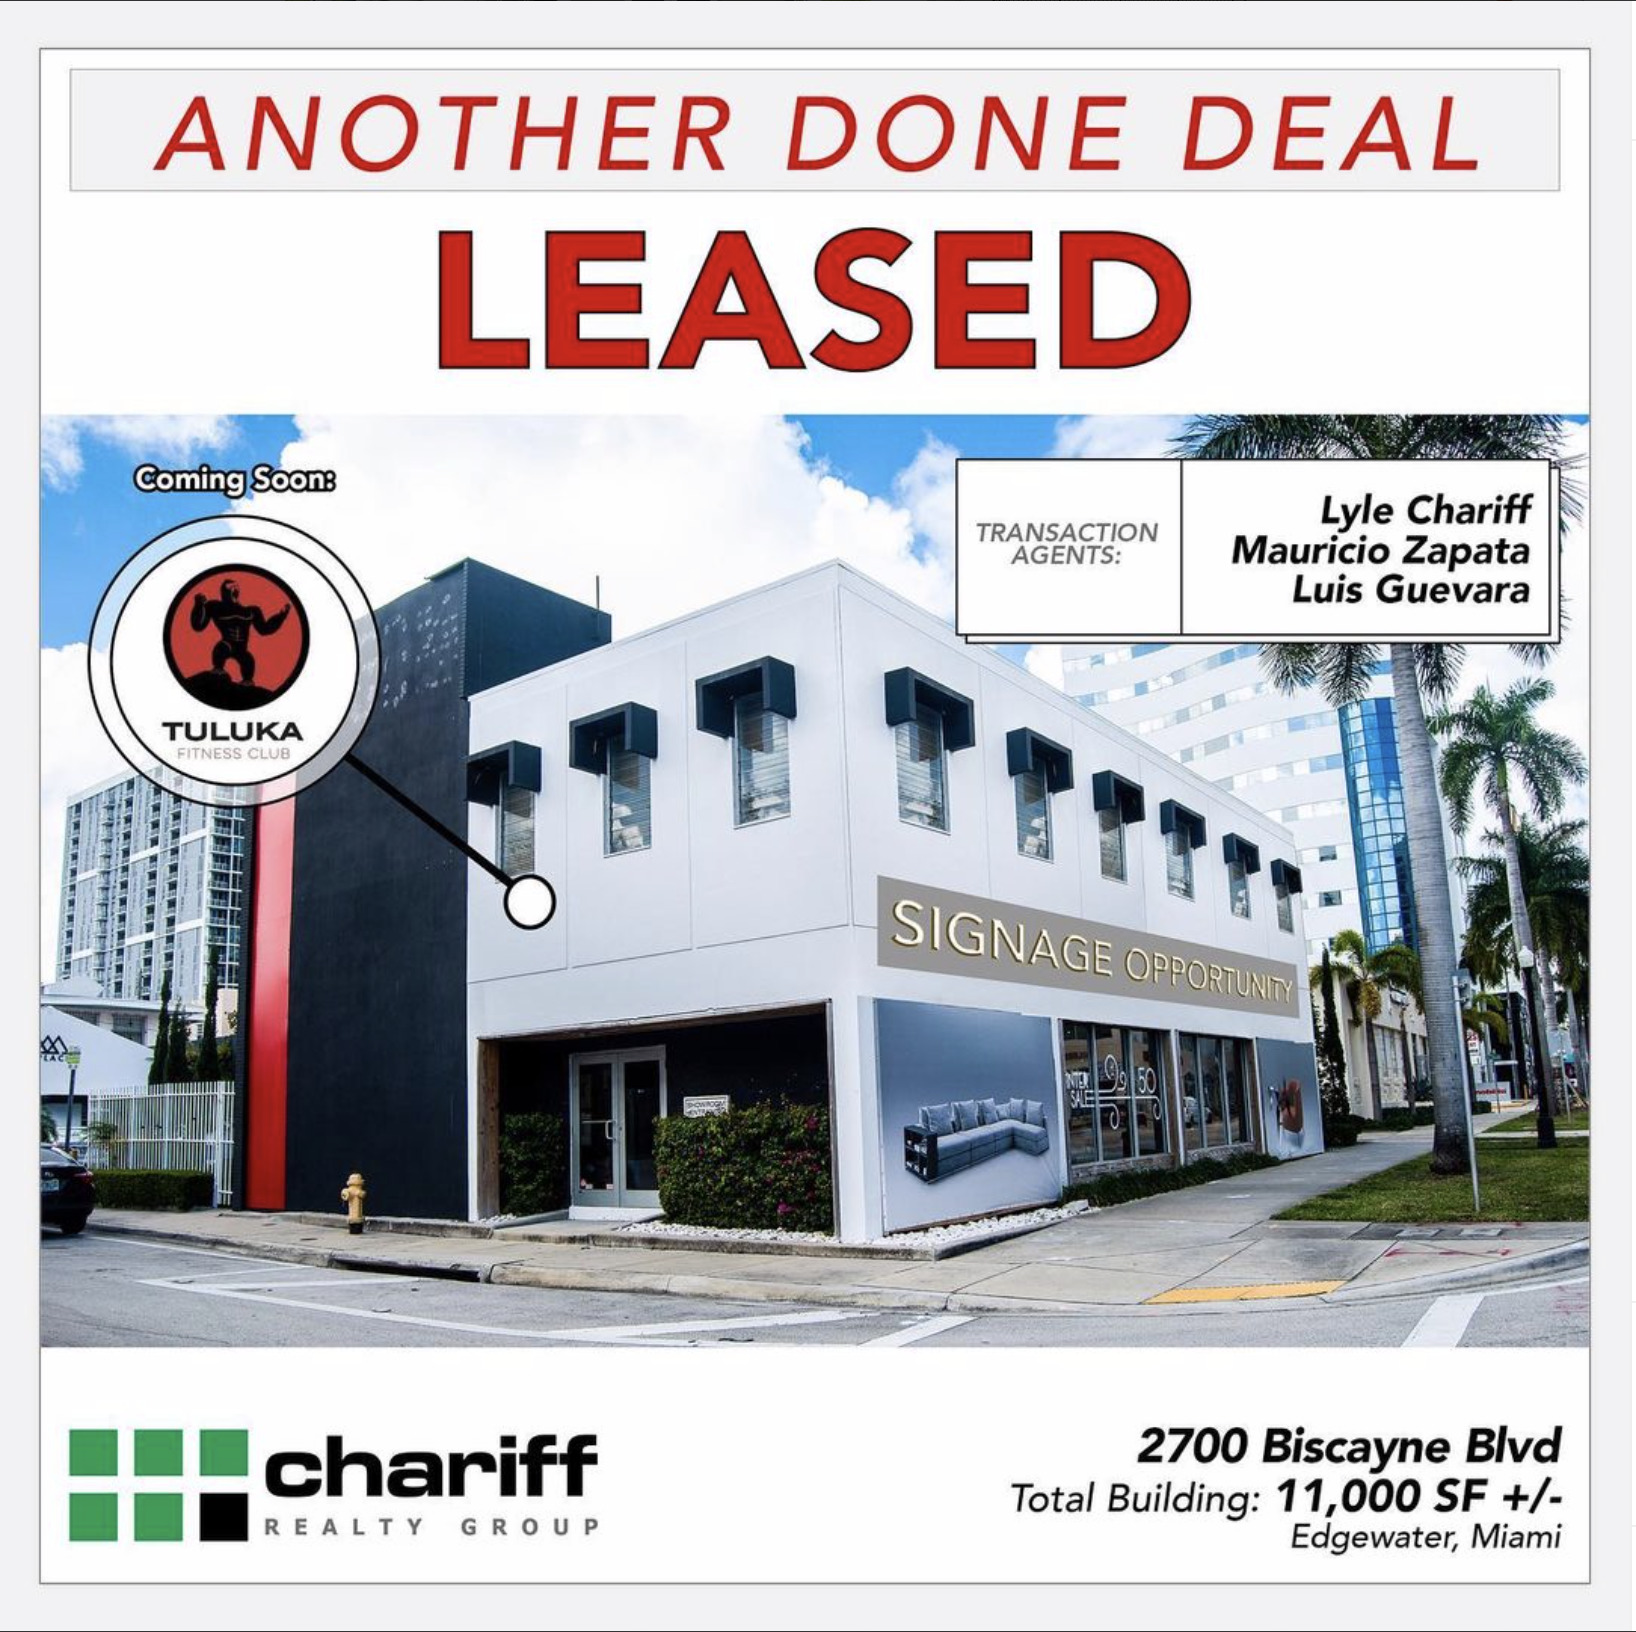 2700 Biscayne Blvd - Another Done Deal - Leased - Edgewater - Miami-Florida-33137-Chariff Realty Group